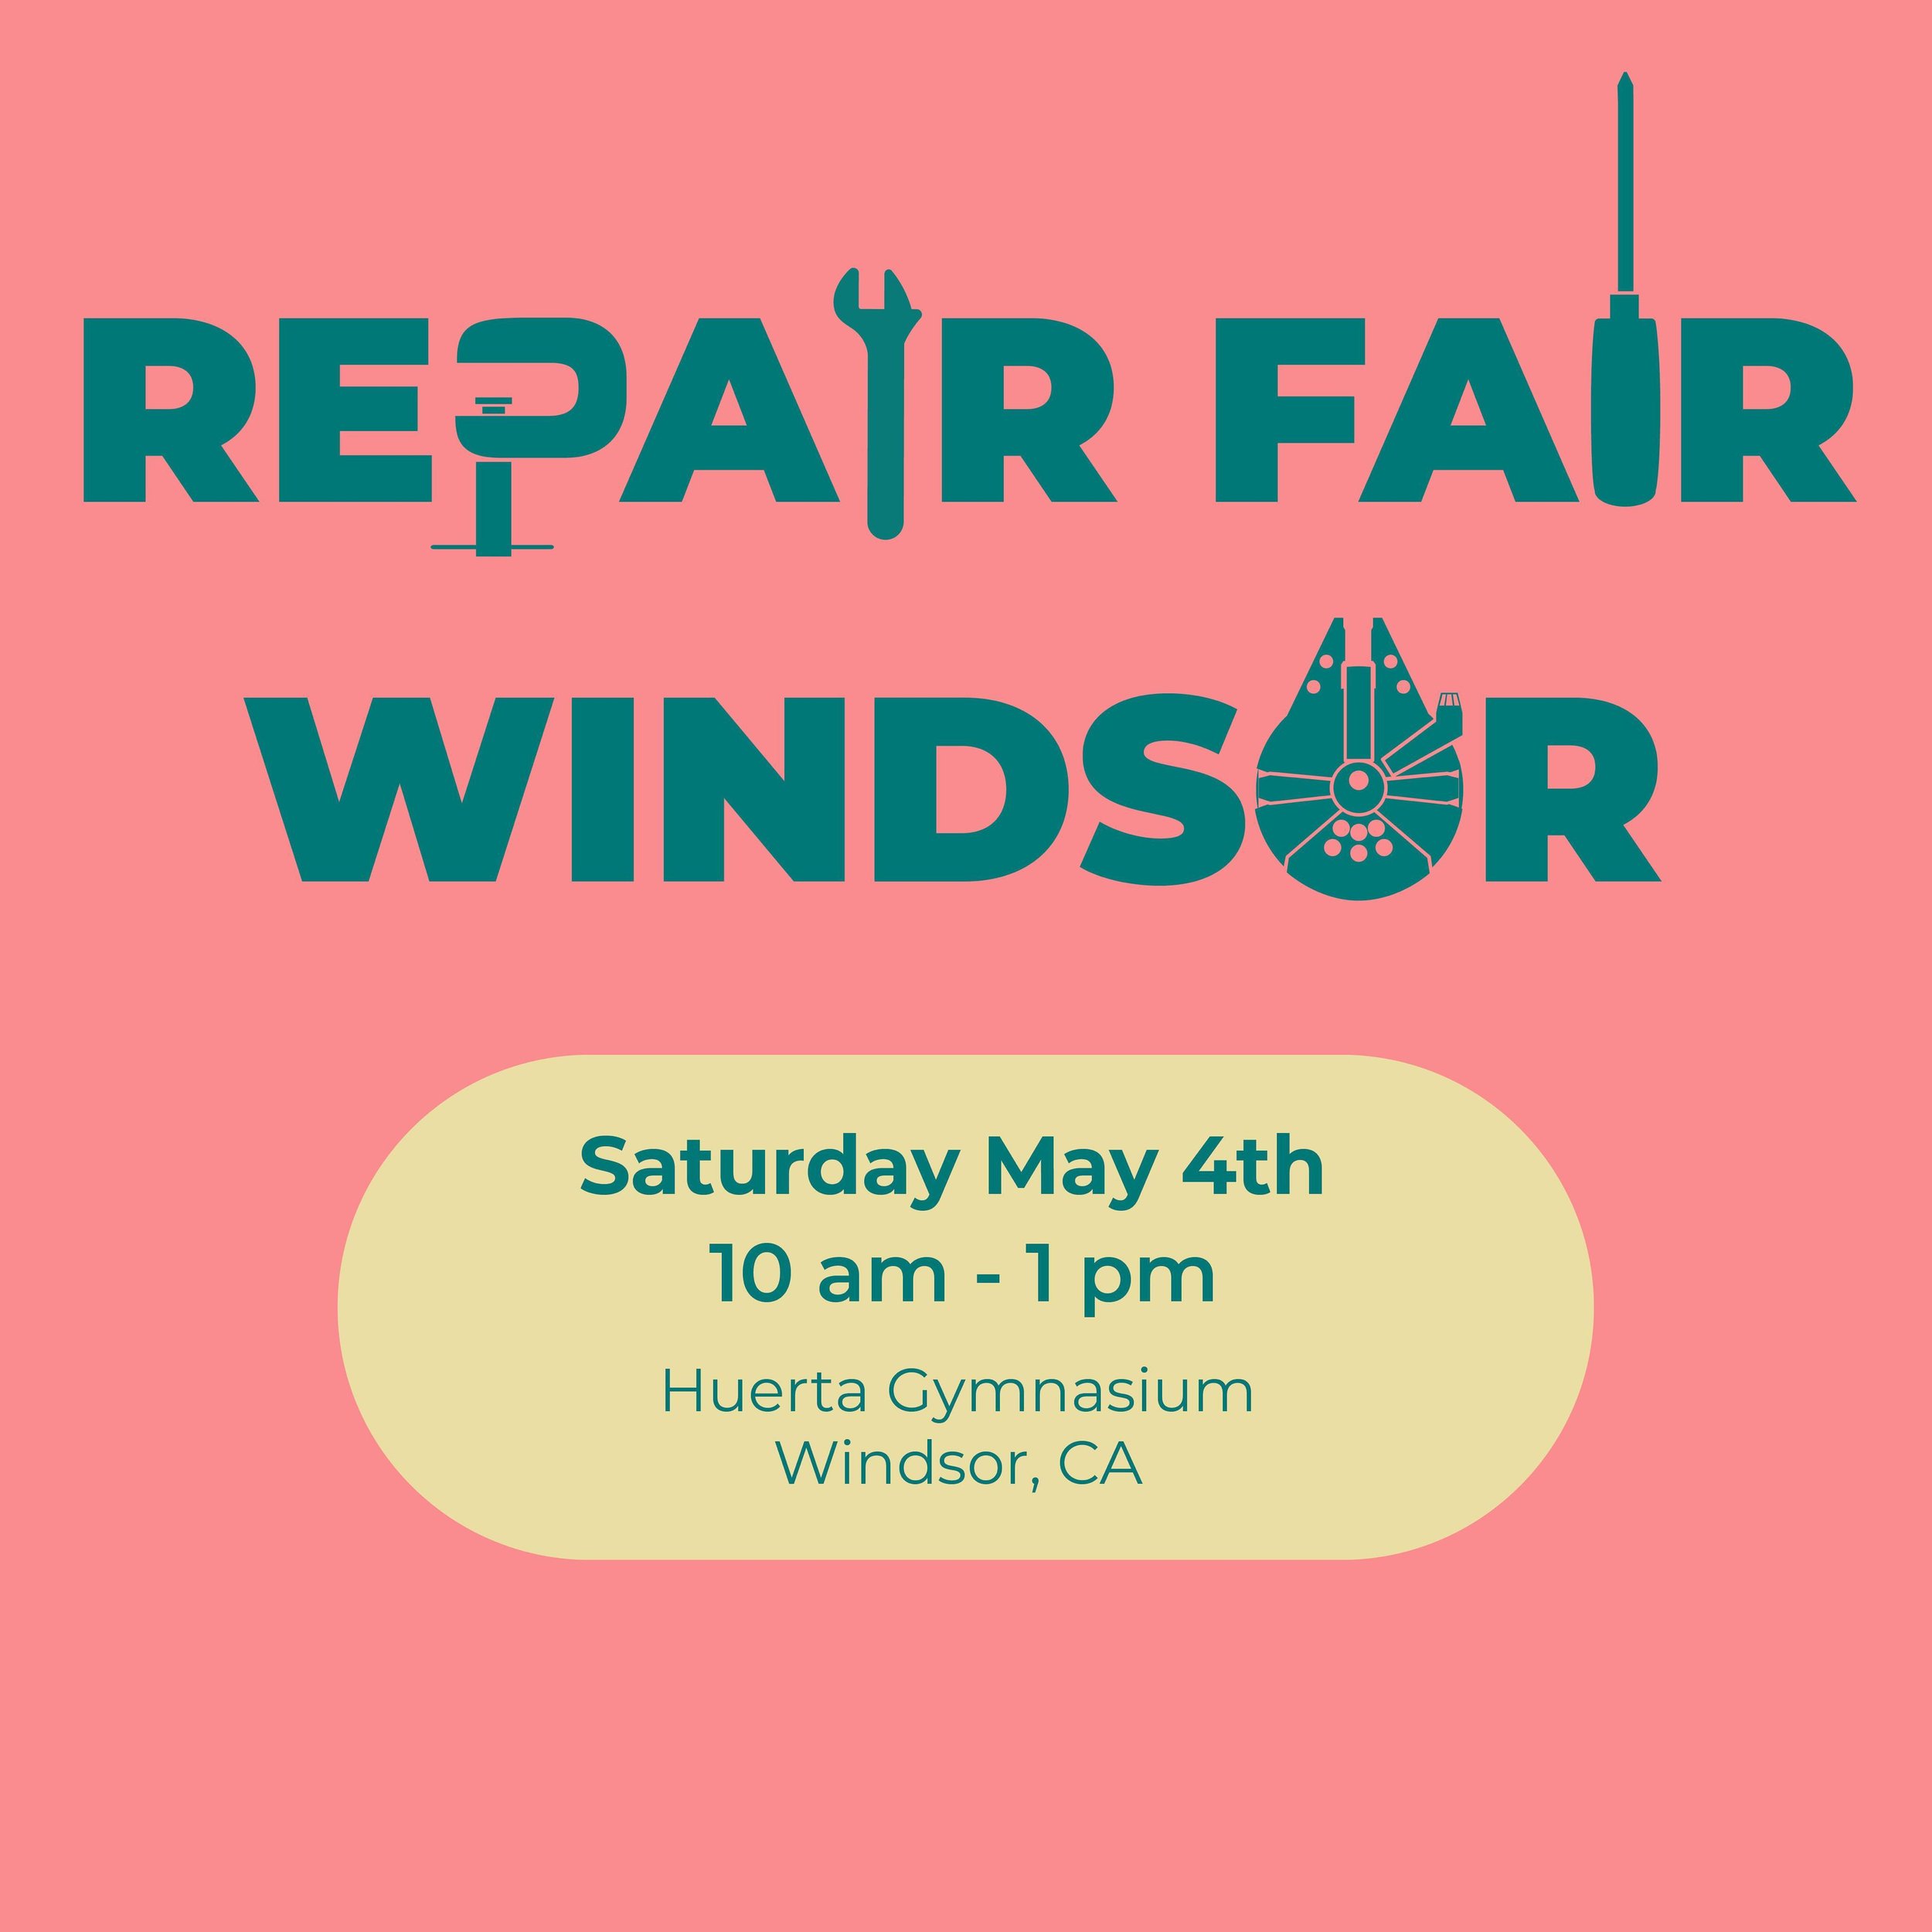 Our next Repair Fair is coming up in a little over a week!  We will be in Windsor at the Huerta Gymnasium on May the 4th, from 10am - 1pm. 

Link in bio to register. 

In addition to the Repair Fair there will be a clothing swap, Conservation Corps N